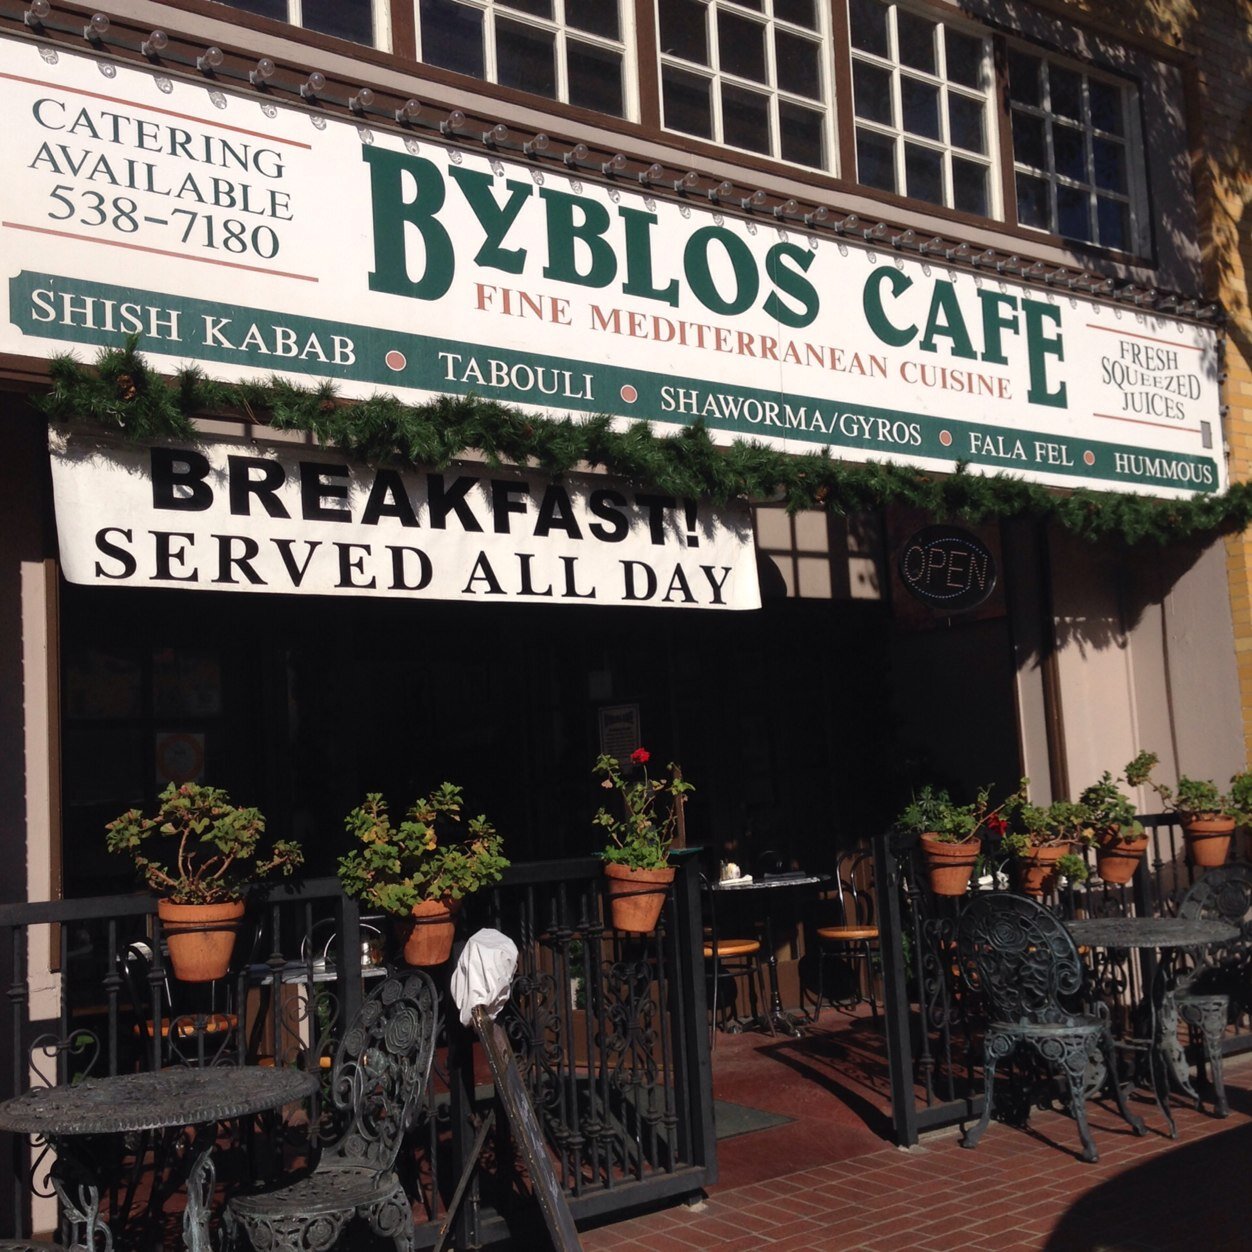 Located in Old Towne Orange 129 West Chapman Ave, 92866 The Original since 1989 Family owned by the Mahshi's
Instagram: @byblos_cafe_